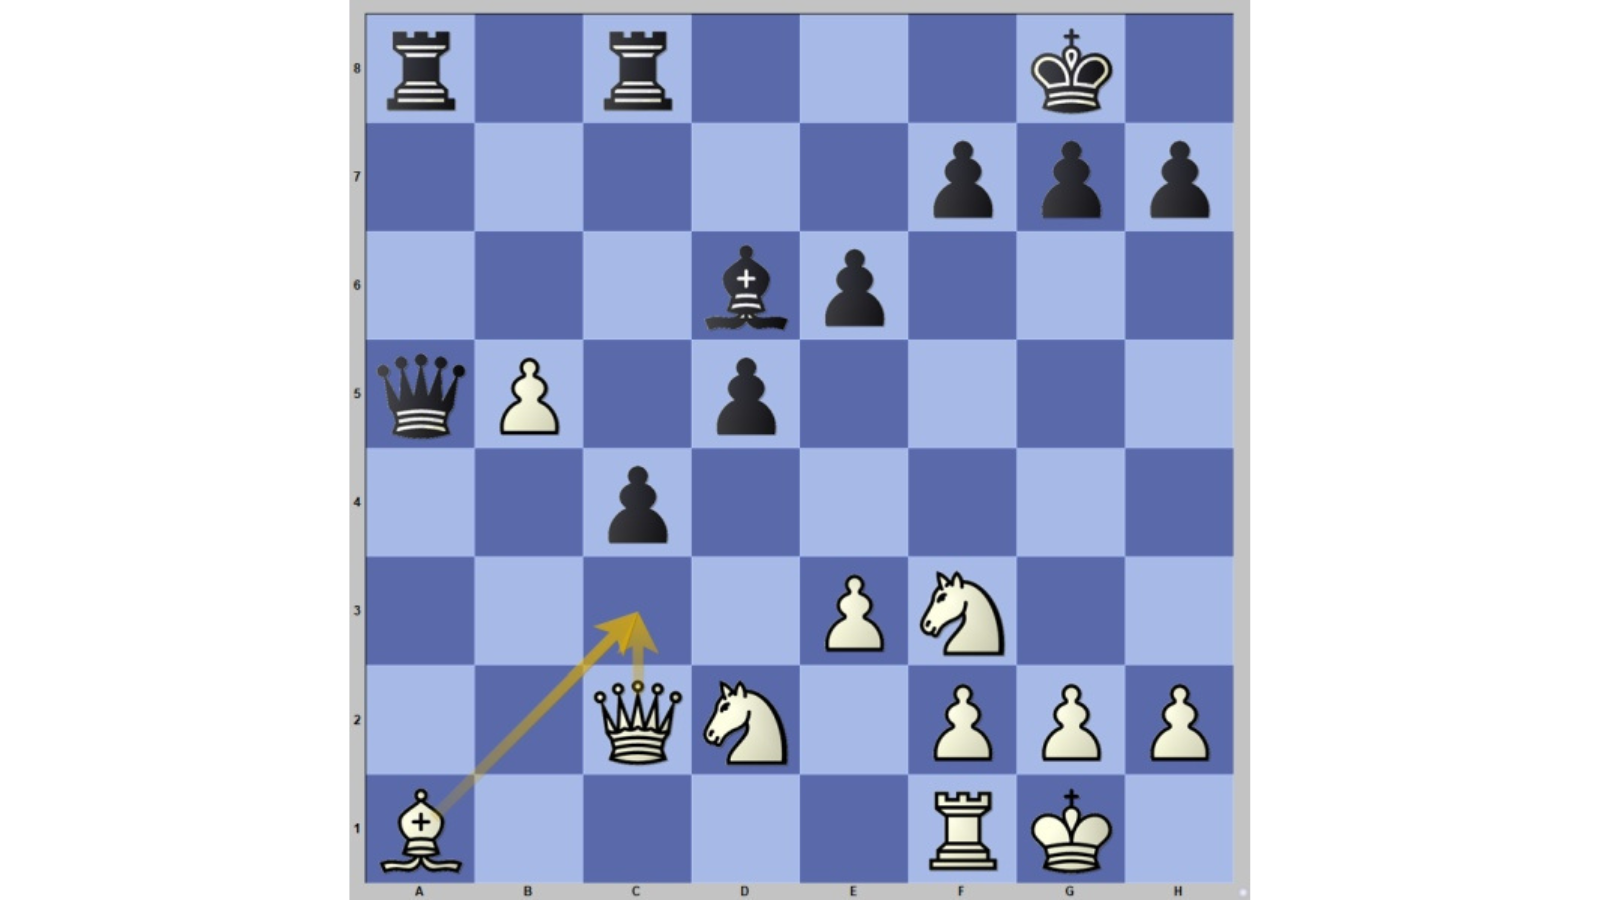 Material Imbalances: Queen versus Two Rooks - TheChessWorld